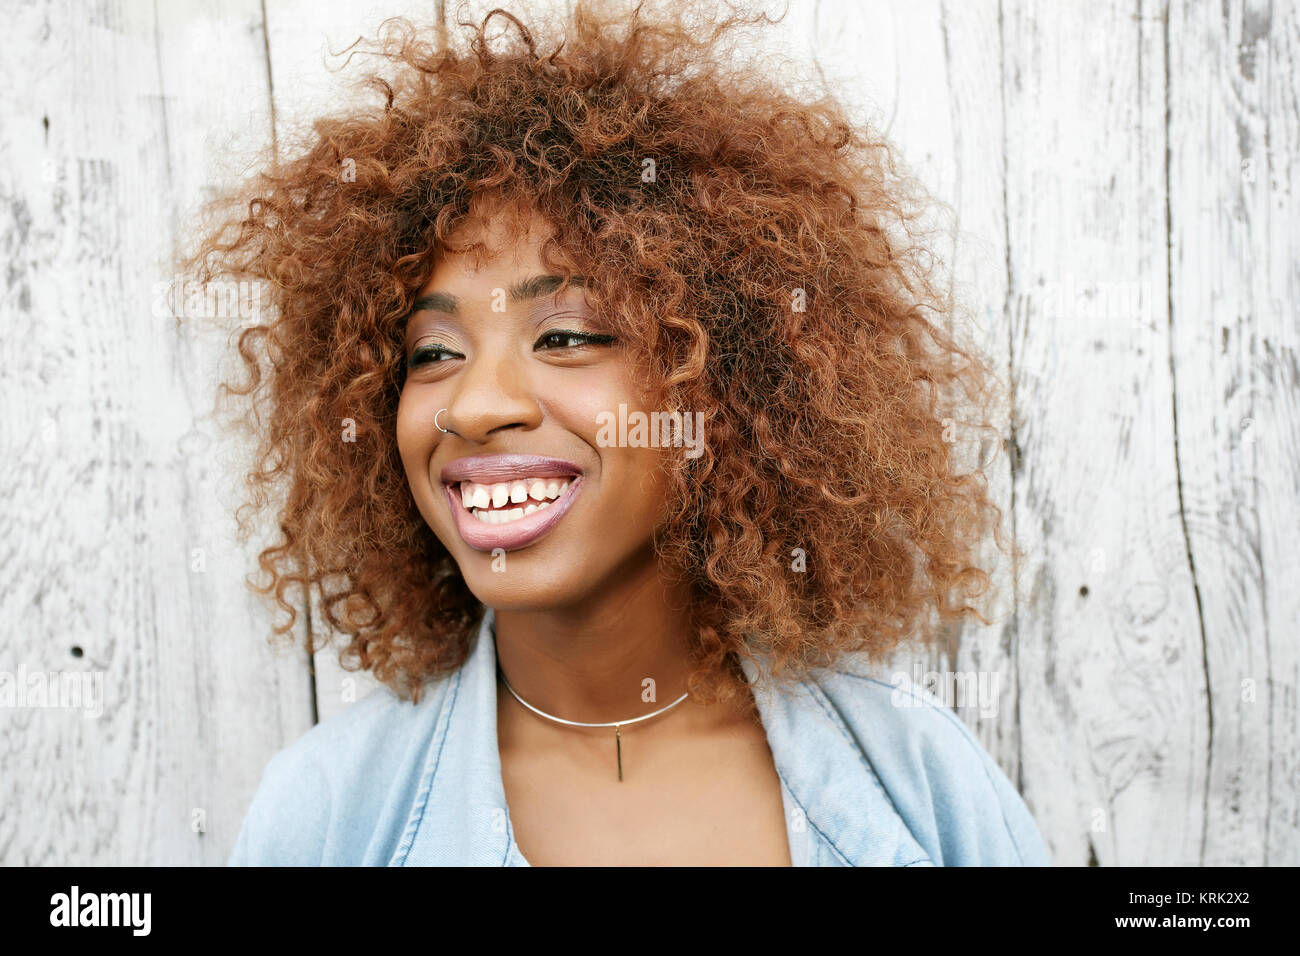 Close up of smiling black woman Stock Photo